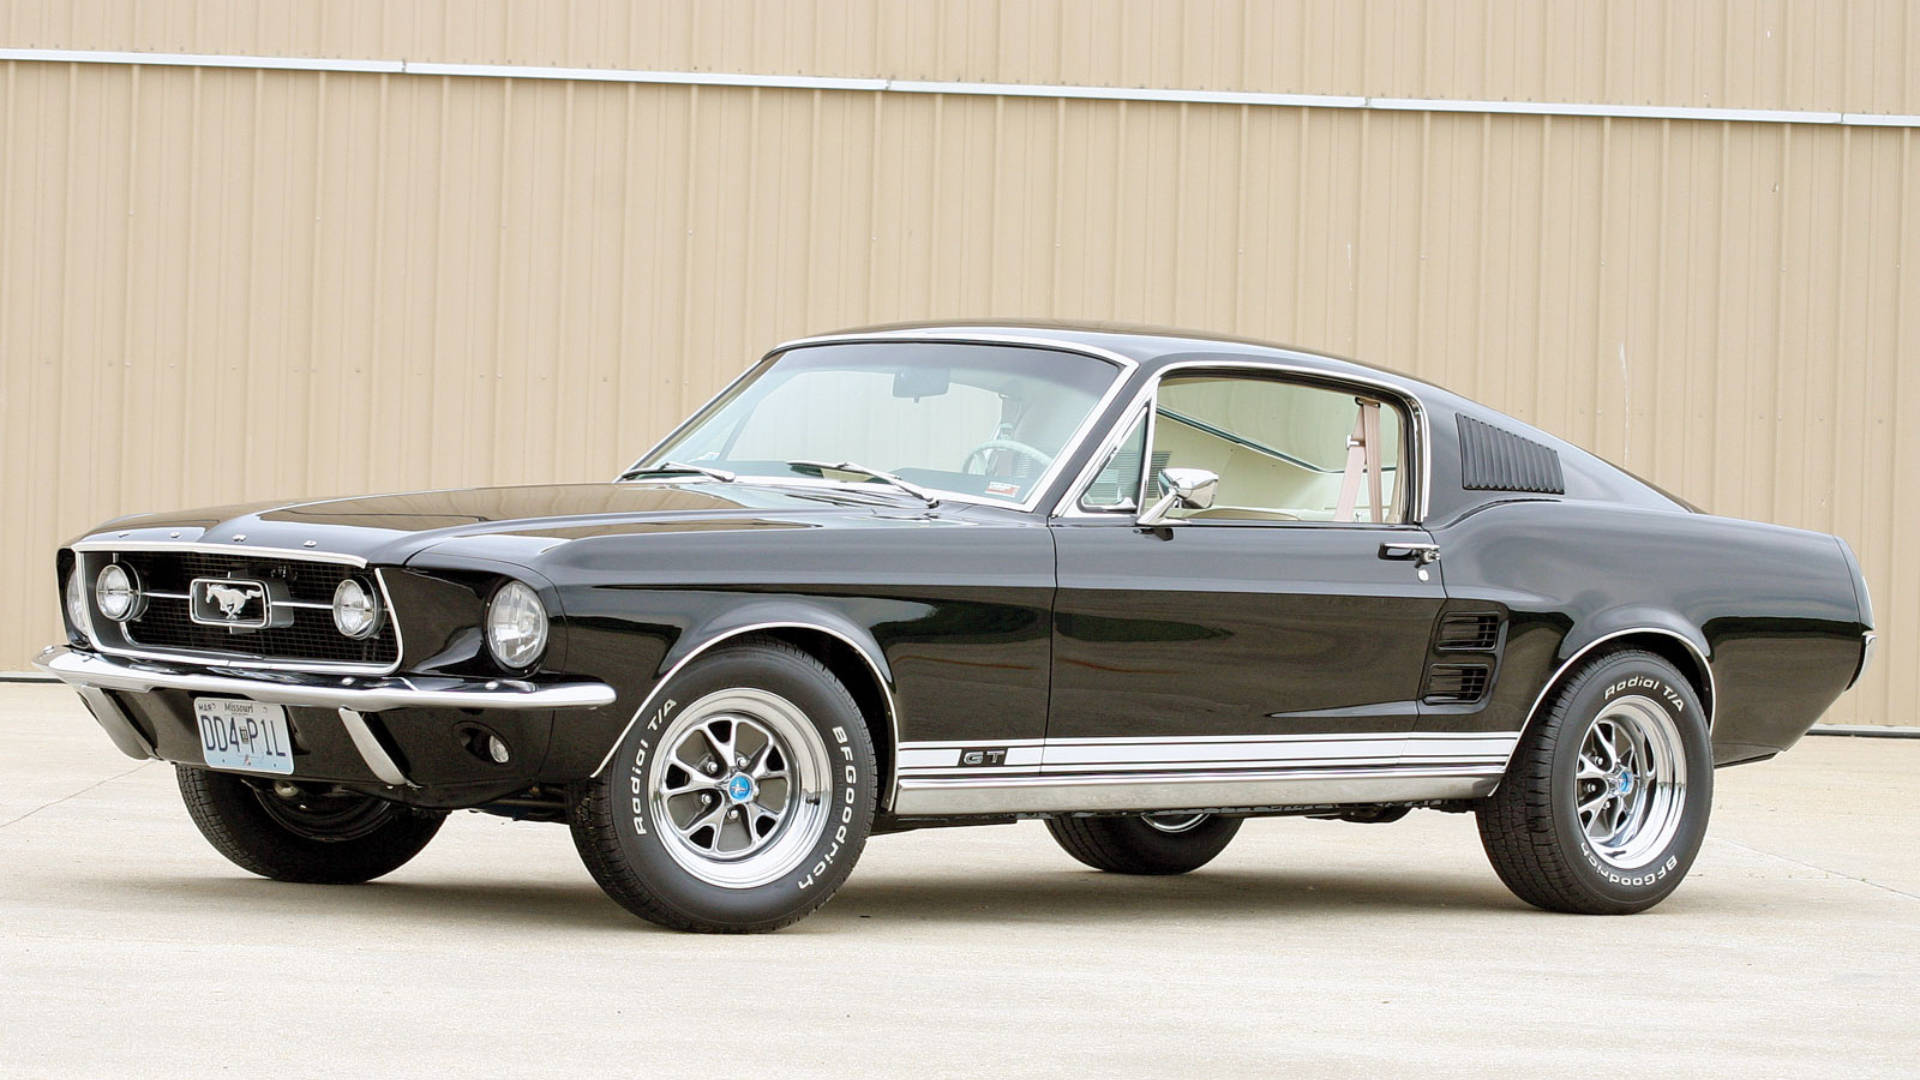 1960s Style Ford Mustang Hd Wallpaper